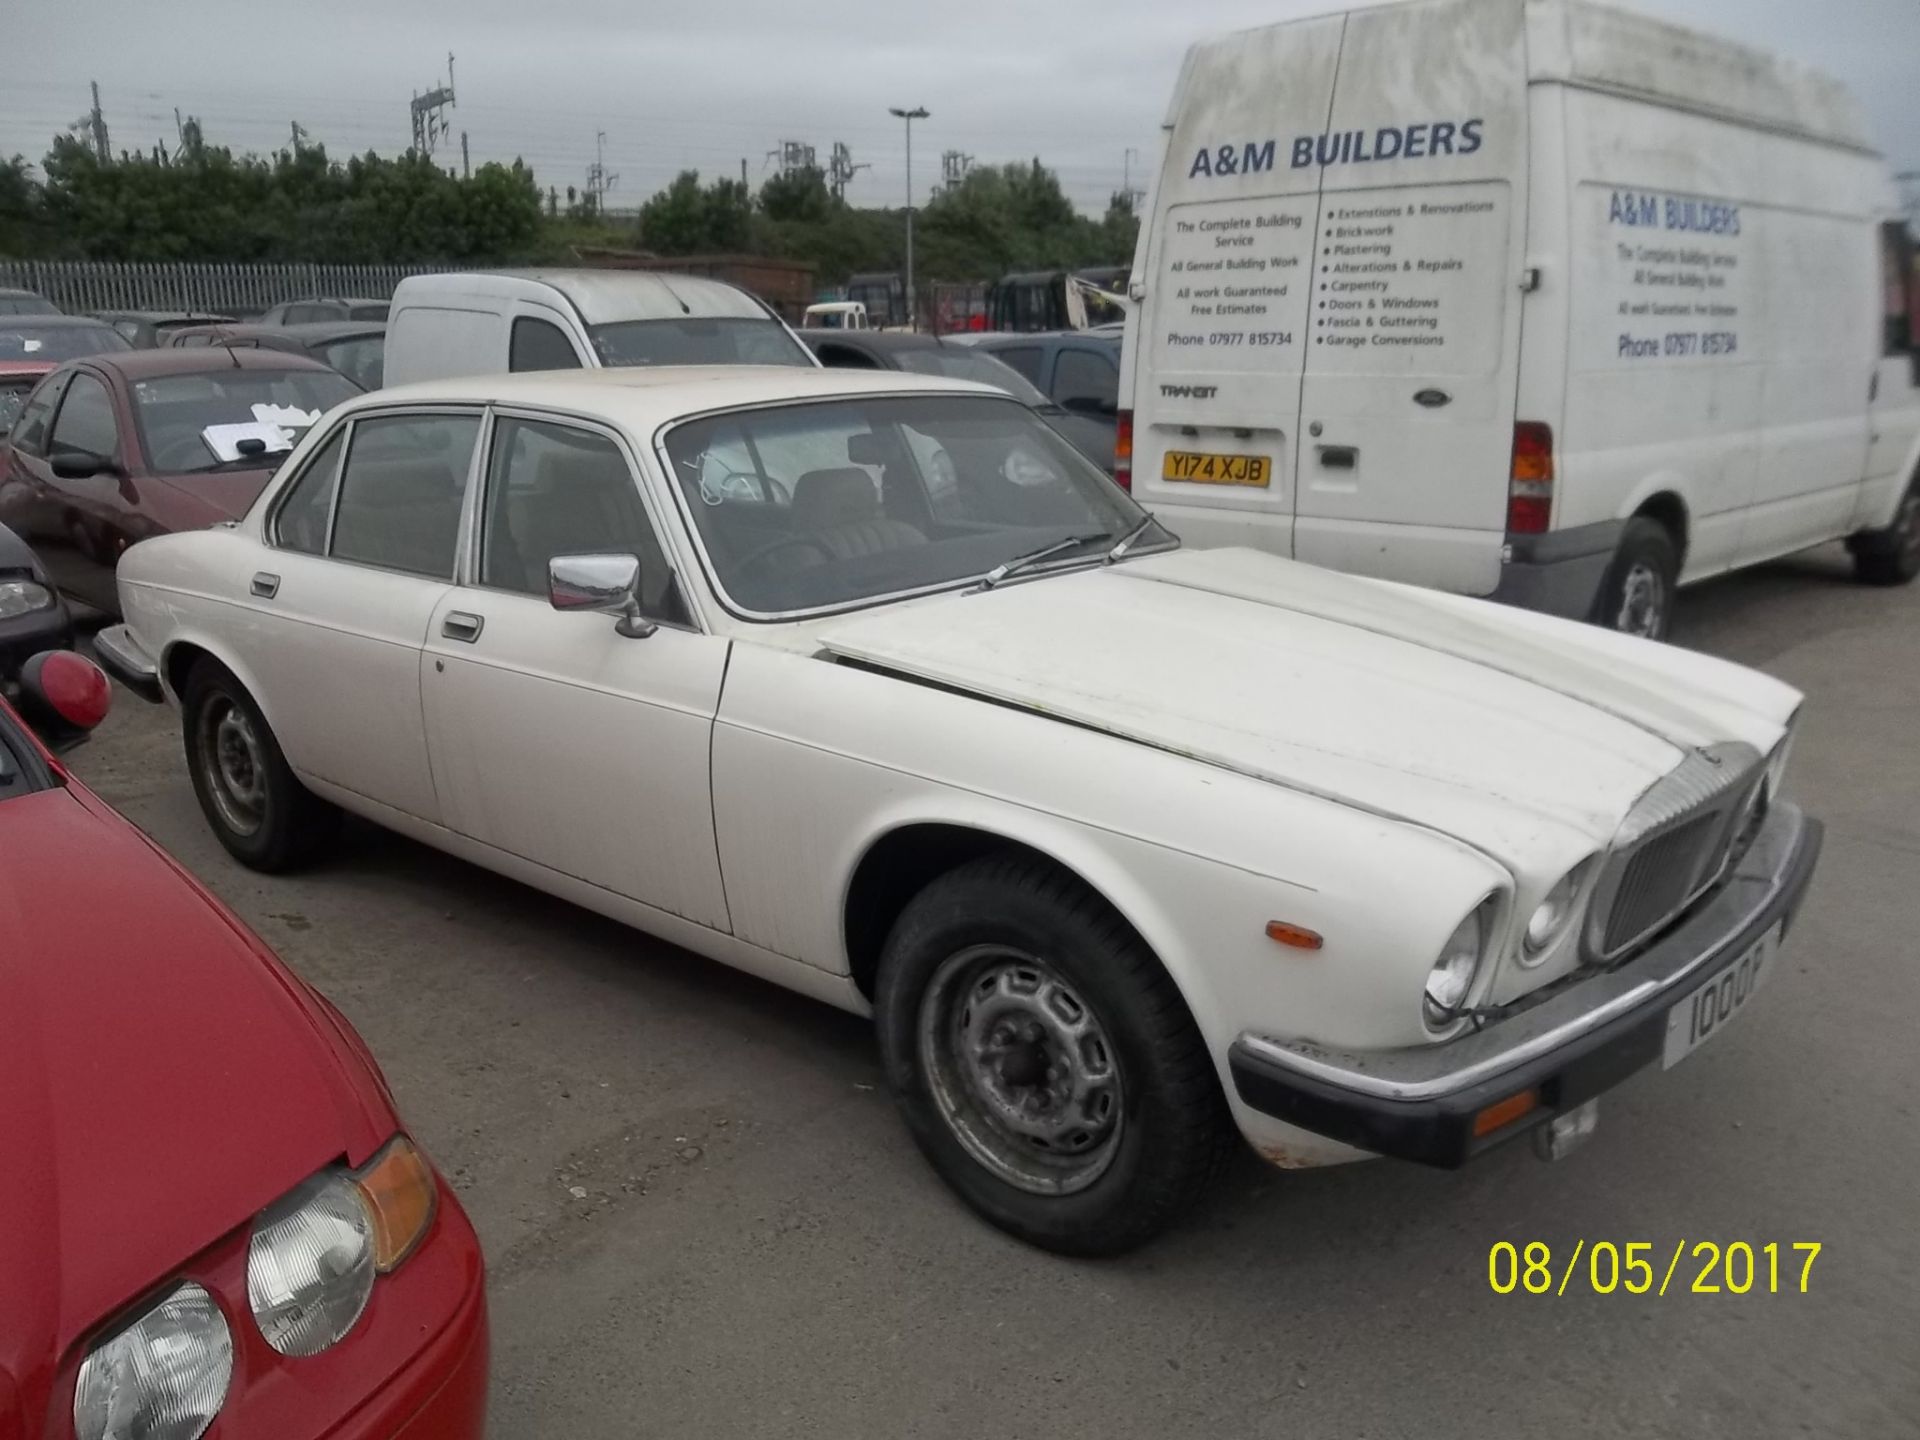 Daimler 4.2 Sovereign - 100 OP Date of registration: 01.01.1980 4235cc, petrol, automatic, white - Image 3 of 4